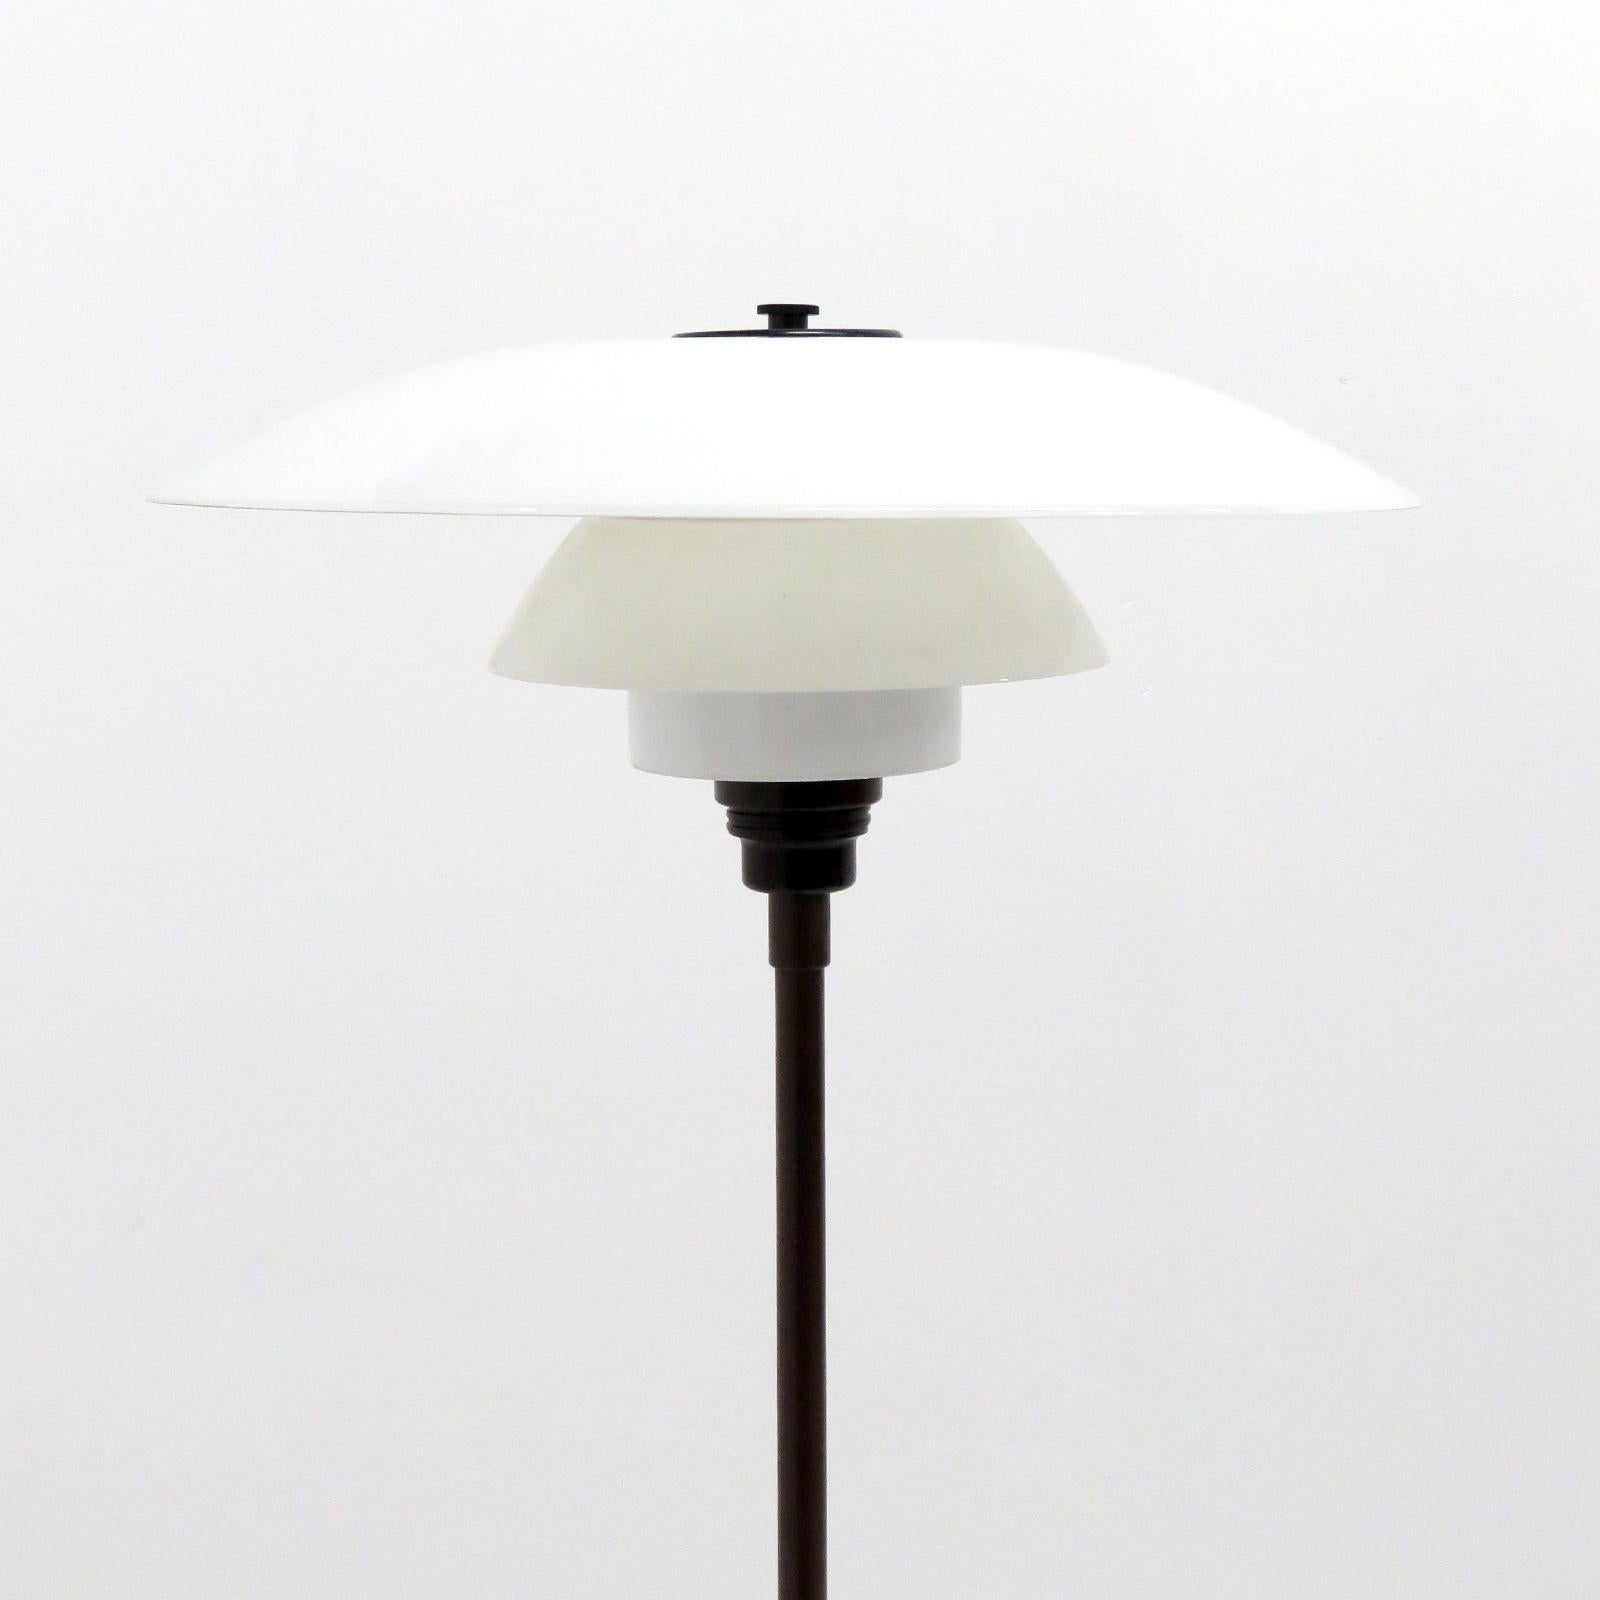 Rare, early floor lamp by Poul Henningsen for Louis Poulsen with two layer opaline glass PH 4/3 shade set, bakelite socket and cover plate. The lamp is wired for US standards with brown cloth cord and a foot switch, one E27 socket, max. Wattage 100w